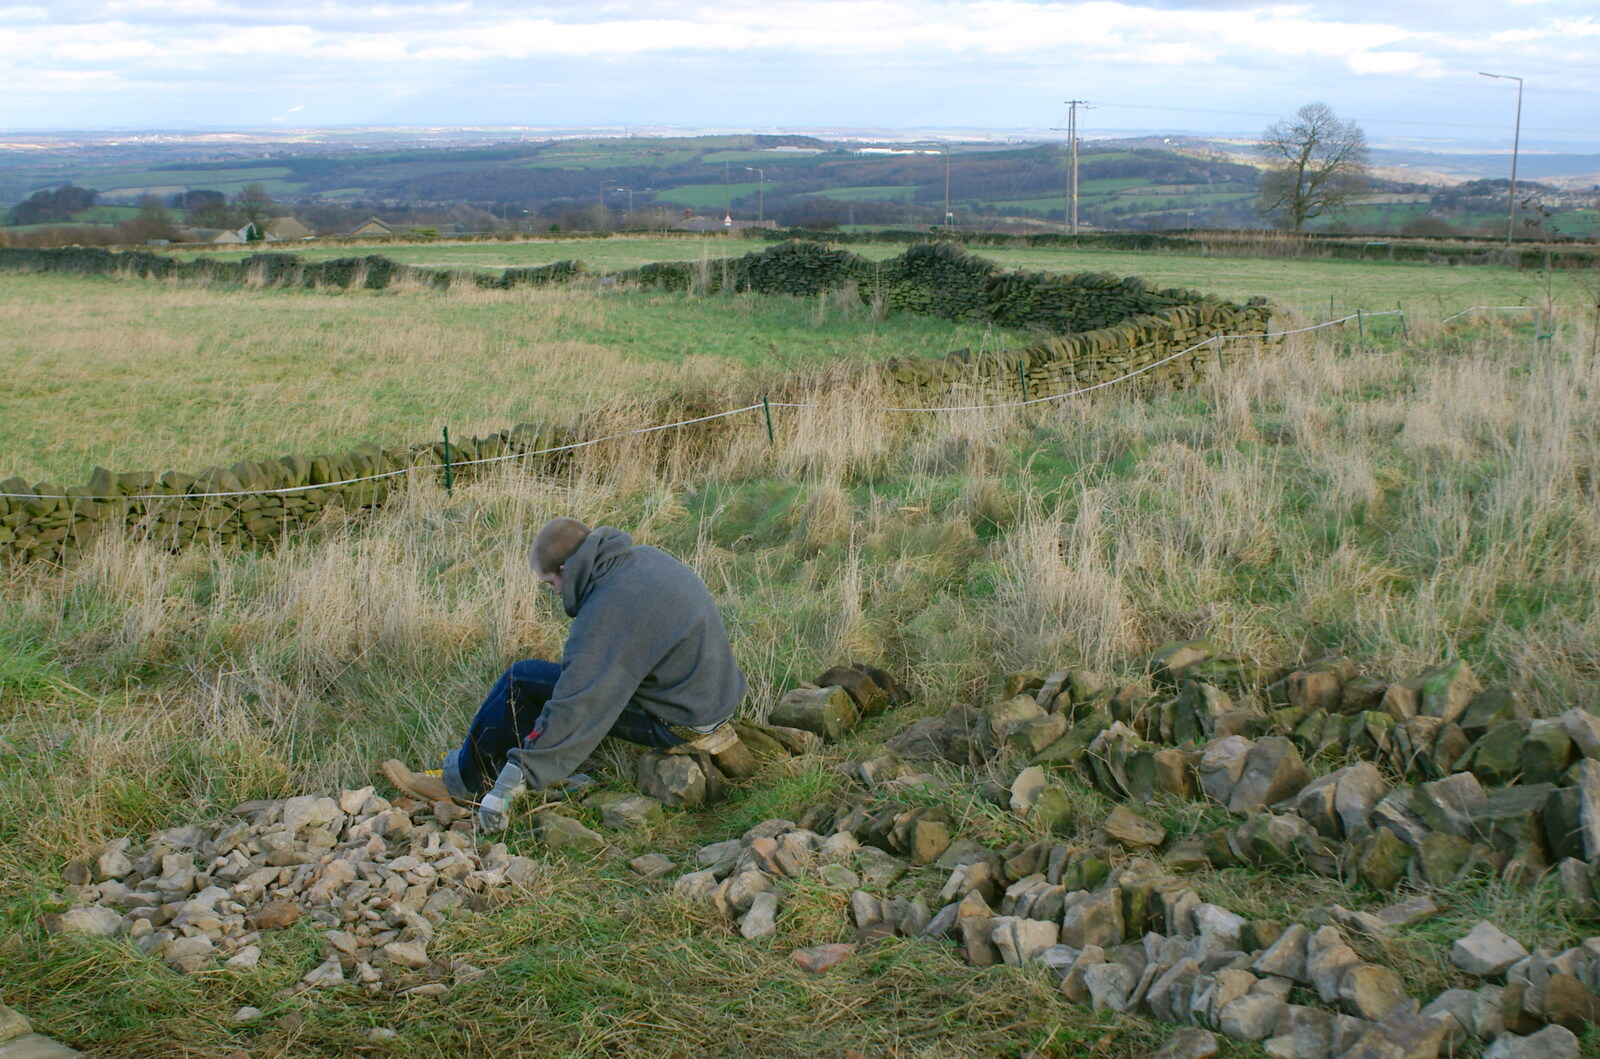 Driving Around Oop North, Hoylandswain, West Yorkshire - 30th January 2005: Another look at the pile of loose stones